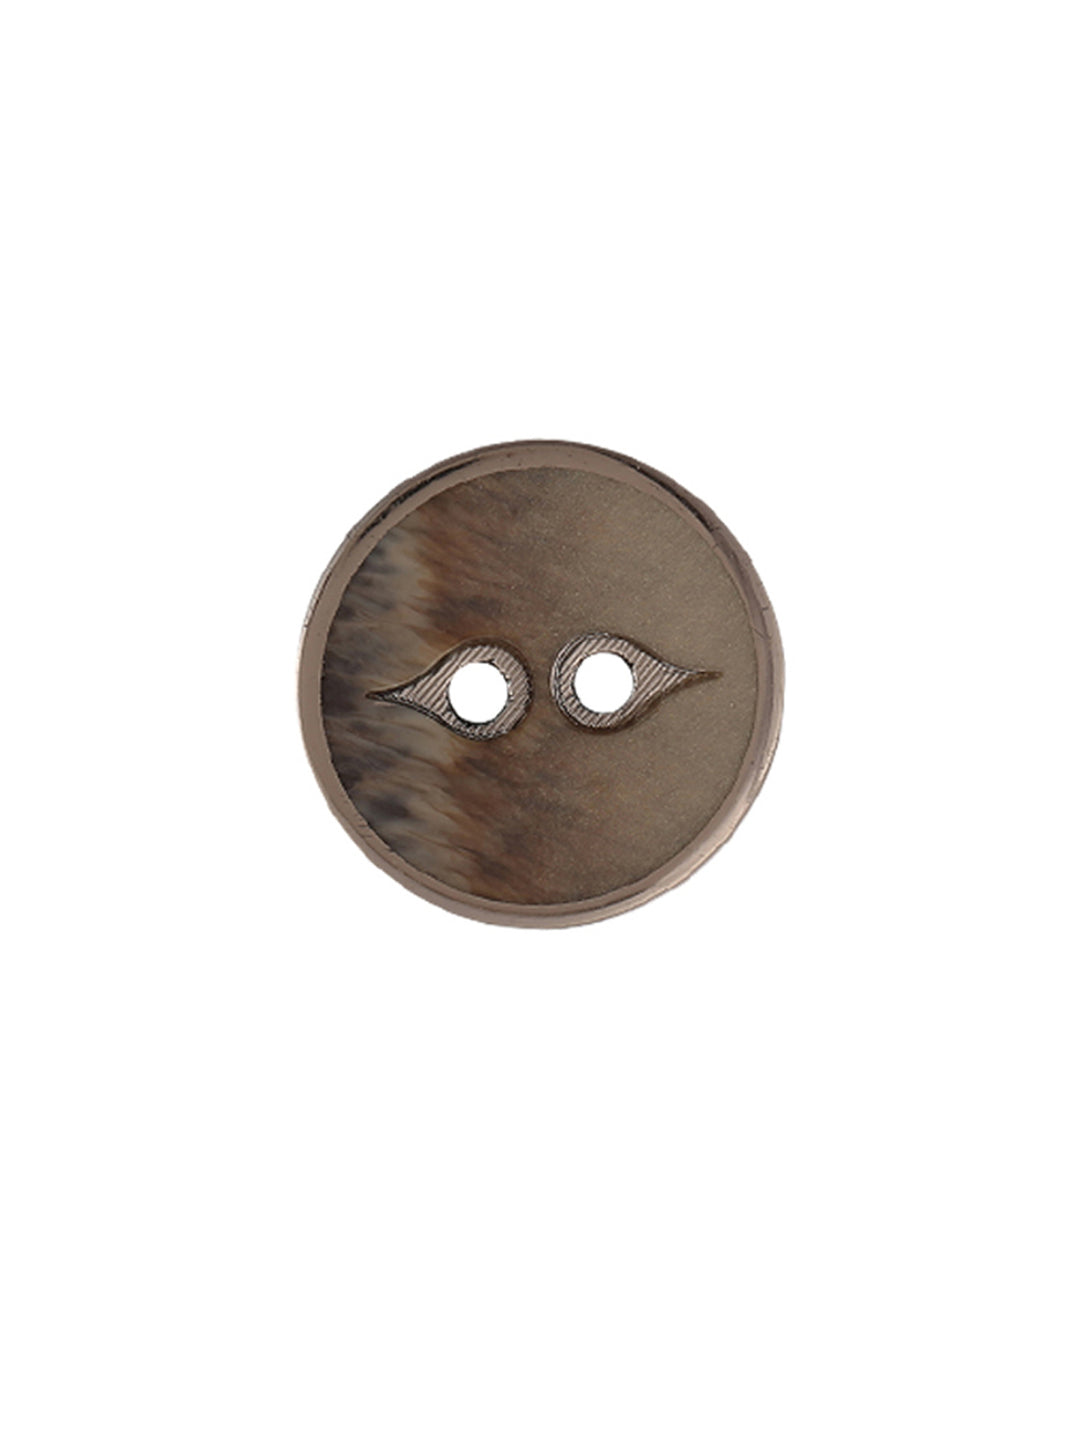 Fancy Round Shape 2-Hole Smooth & Shiny Decorative Brown Color Button